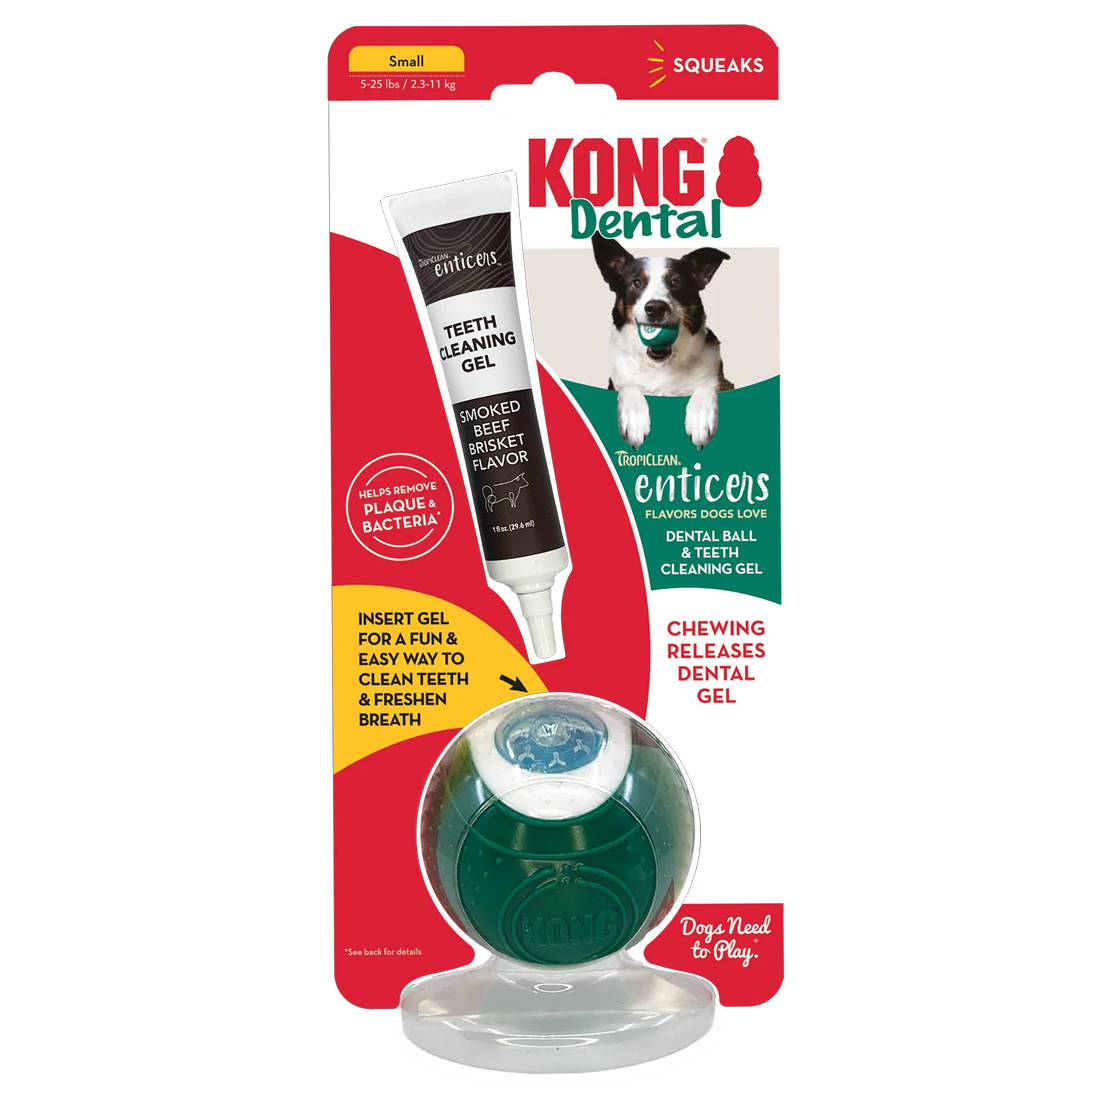 TropiClean Enticers Teeth Cleaning Gel & KONG Dental Ball for Small Dogs, 1  oz - Pet Supplies Delivered